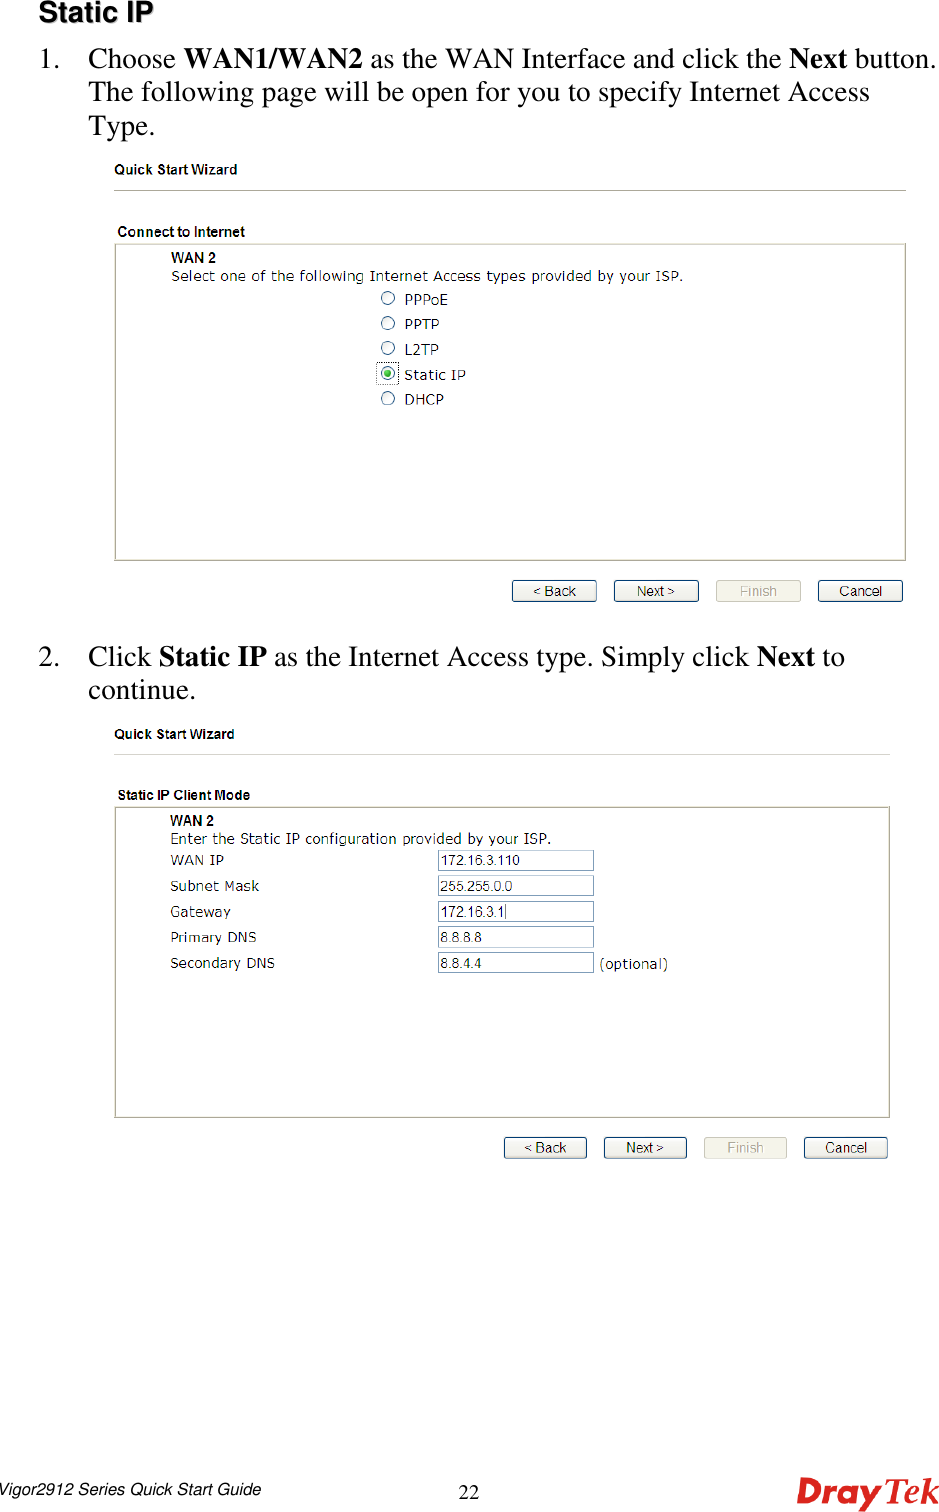  Vigor2912 Series Quick Start Guide 22SSttaattiicc  IIPP  1. Choose WAN1/WAN2 as the WAN Interface and click the Next button. The following page will be open for you to specify Internet Access Type.  2. Click Static IP as the Internet Access type. Simply click Next to continue.  